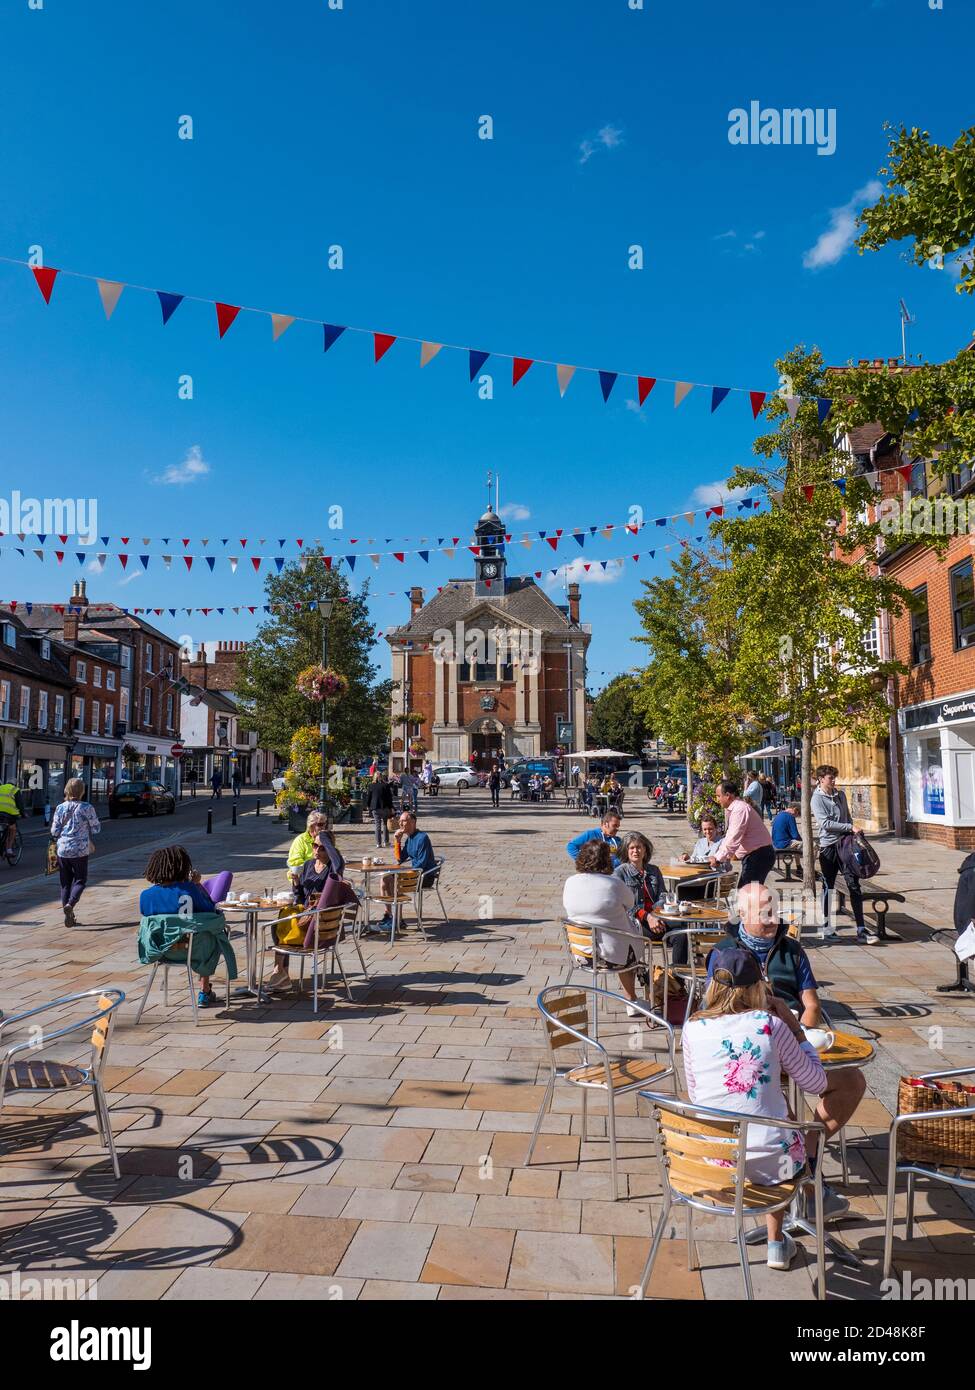 Henley Town Hall, Market Place, con Alfresco eating, Henley-on-Thames, Oxfordshire, Inghilterra, Regno Unito, GB. Foto Stock